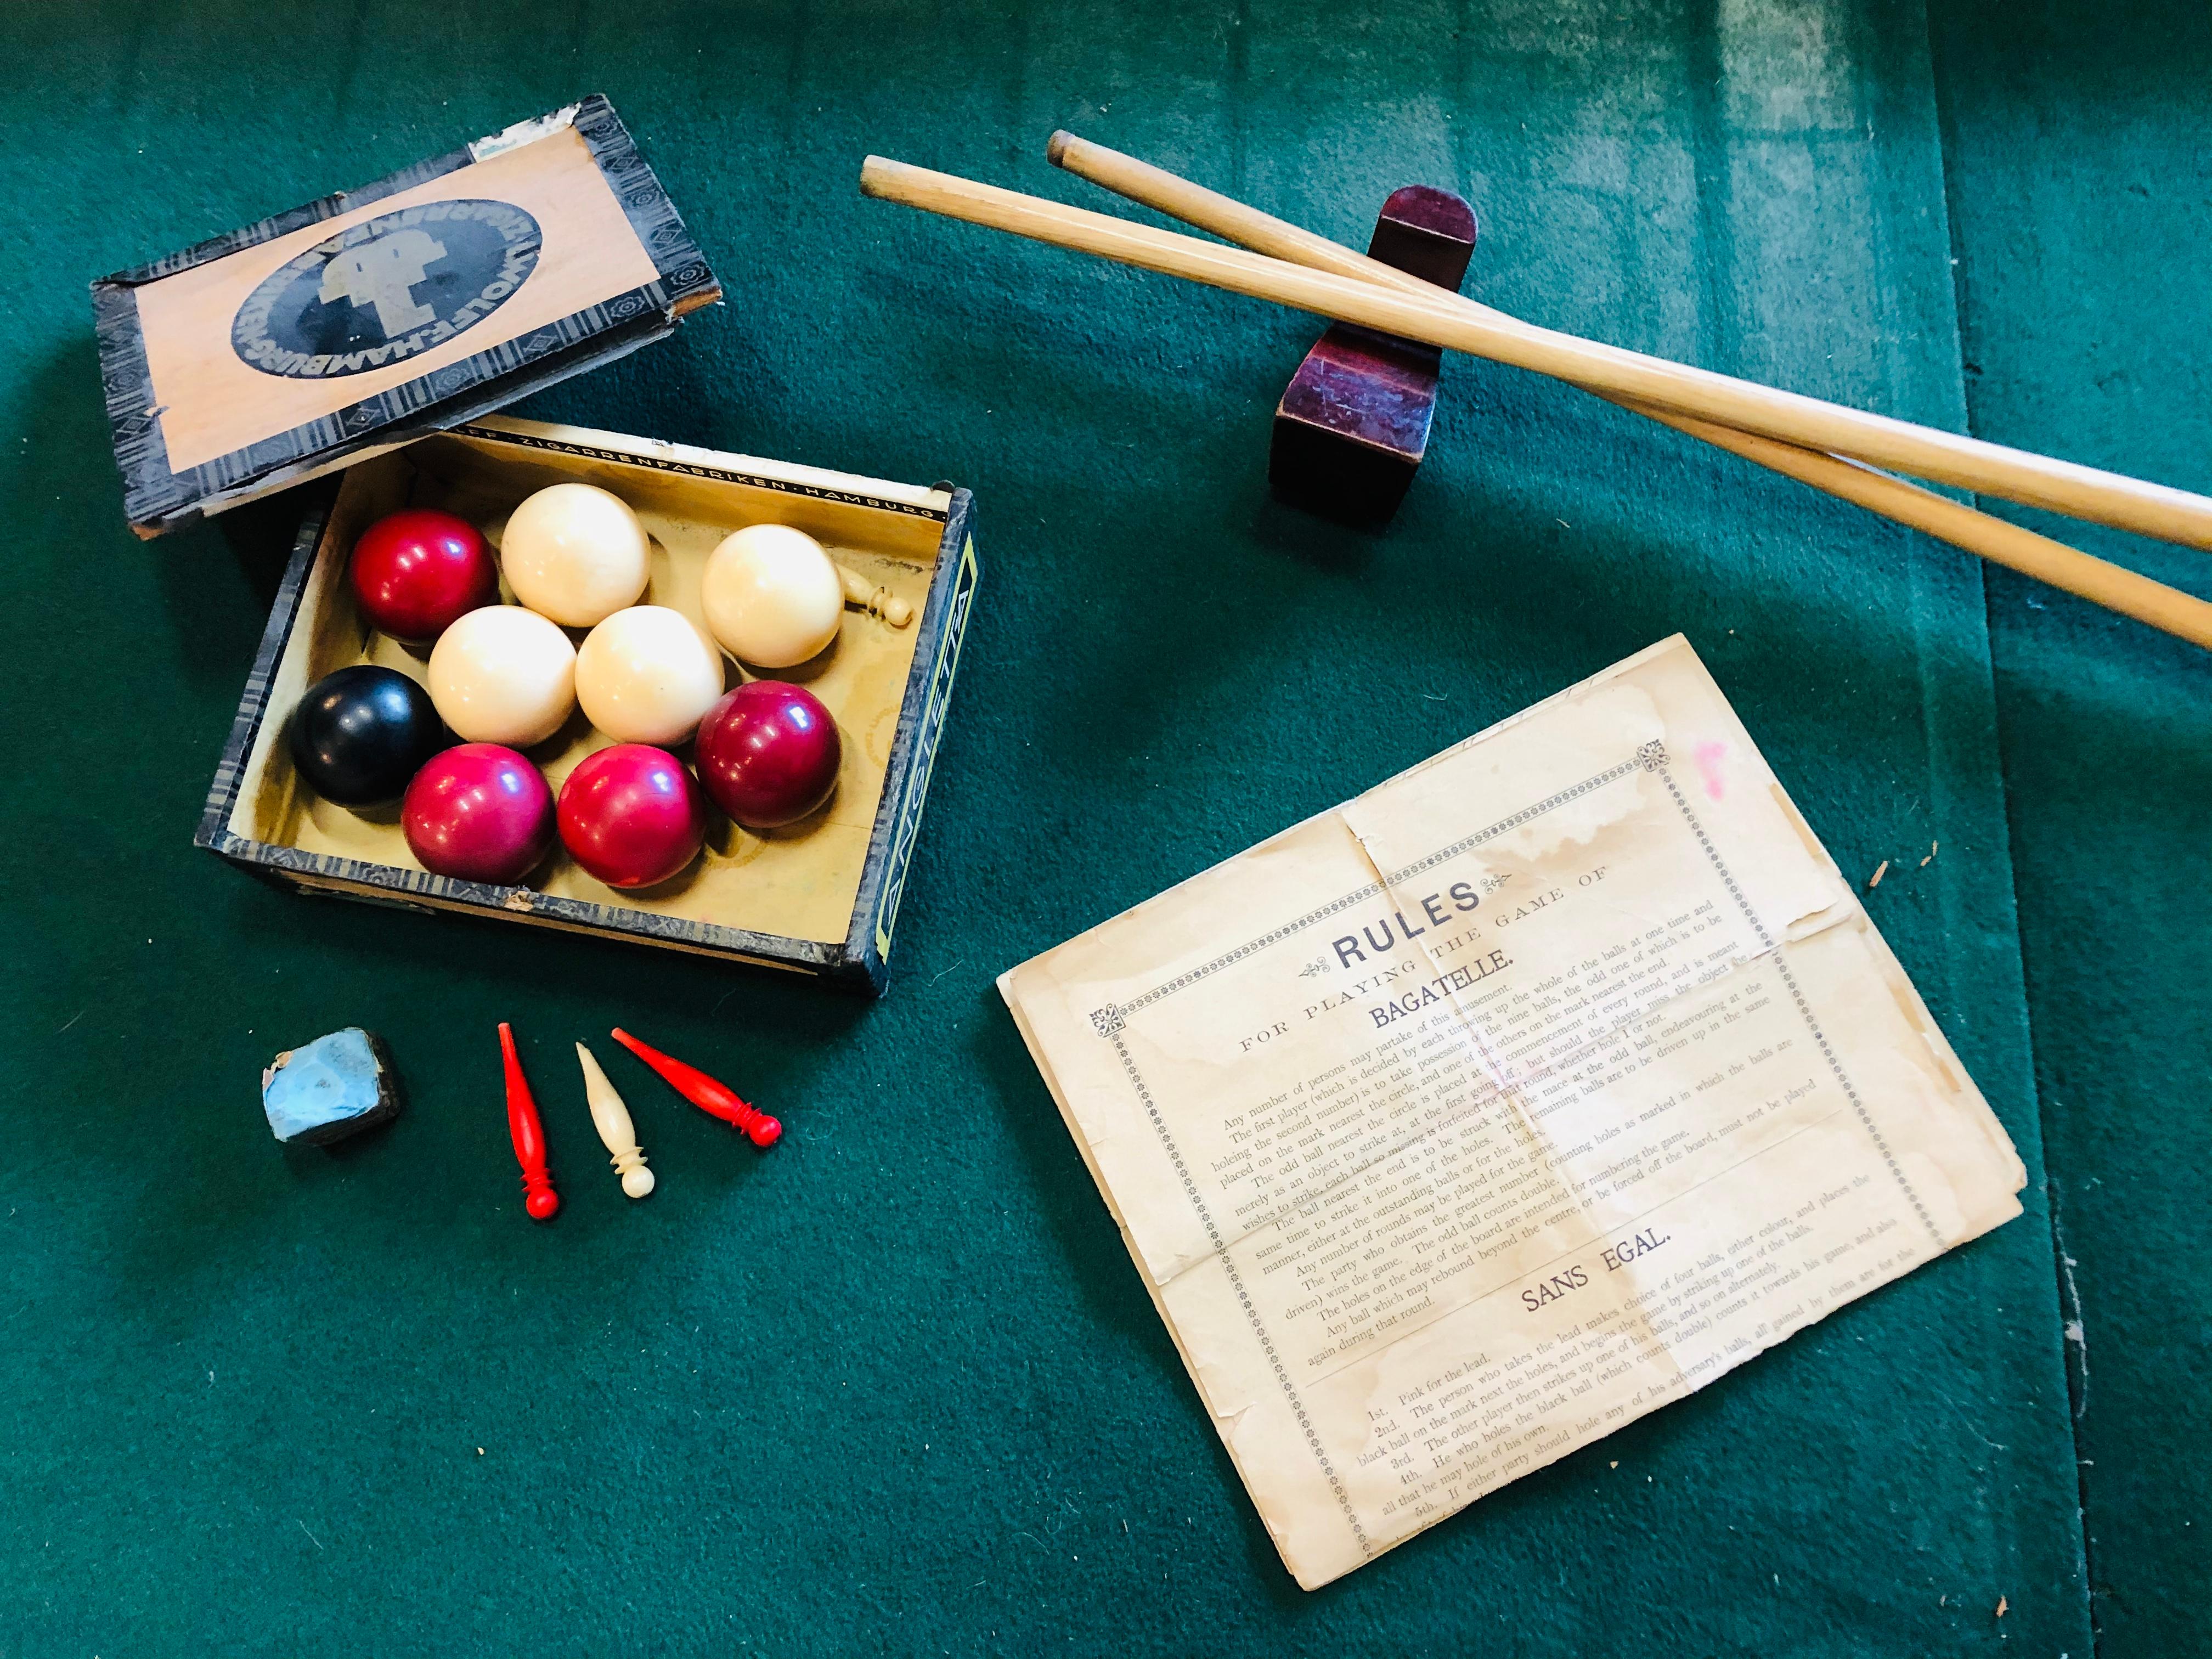 This rare antique table billiard is from England, circa 1900 and due to its age it is particularly rare and still fully functional. It comes with 2 cues, 9 balls (4 white, 4 red and 1 black) and original instructions. Unfortunately, there is a